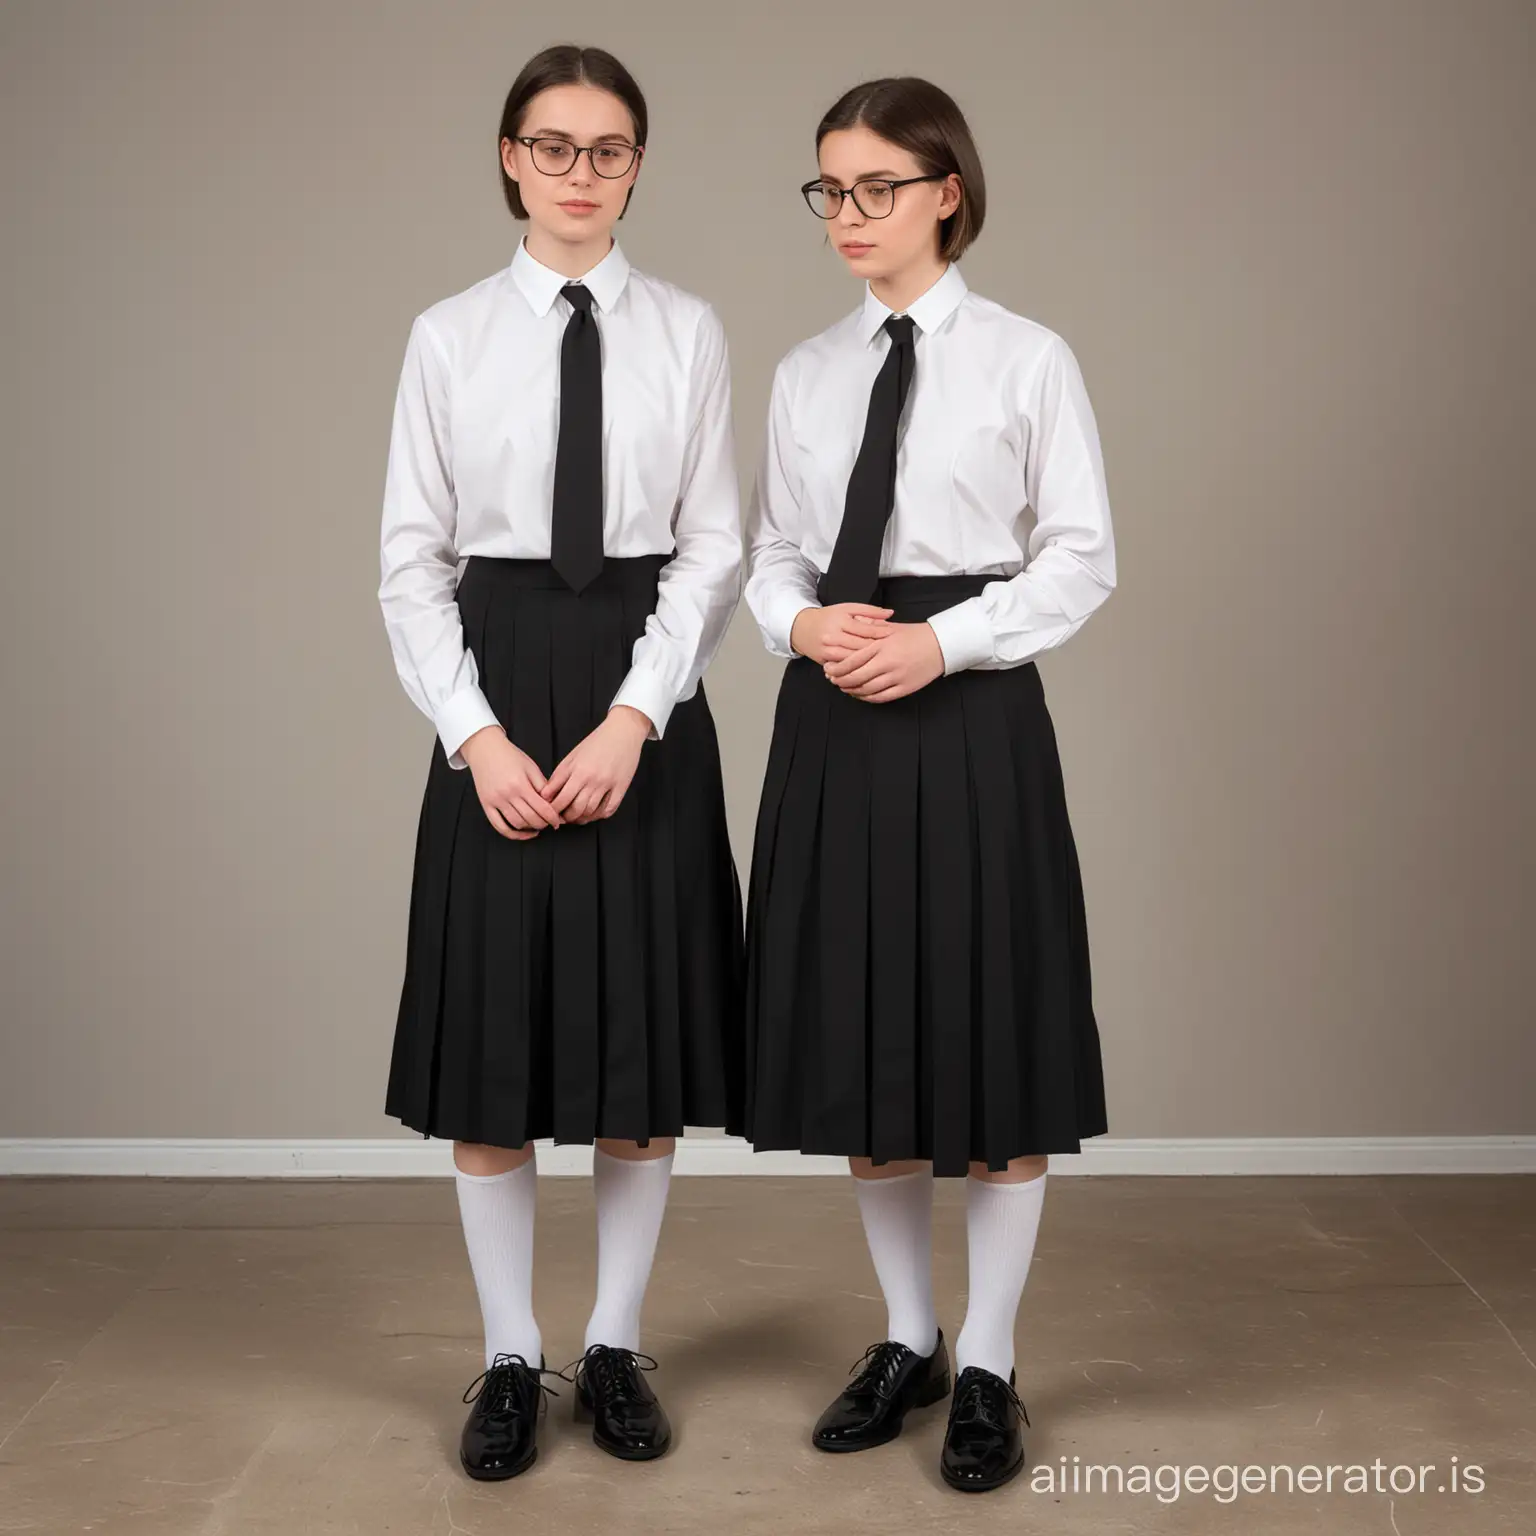 Two-Young-Catholic-Postulants-in-Prayer-with-Short-Hair-and-Glasses